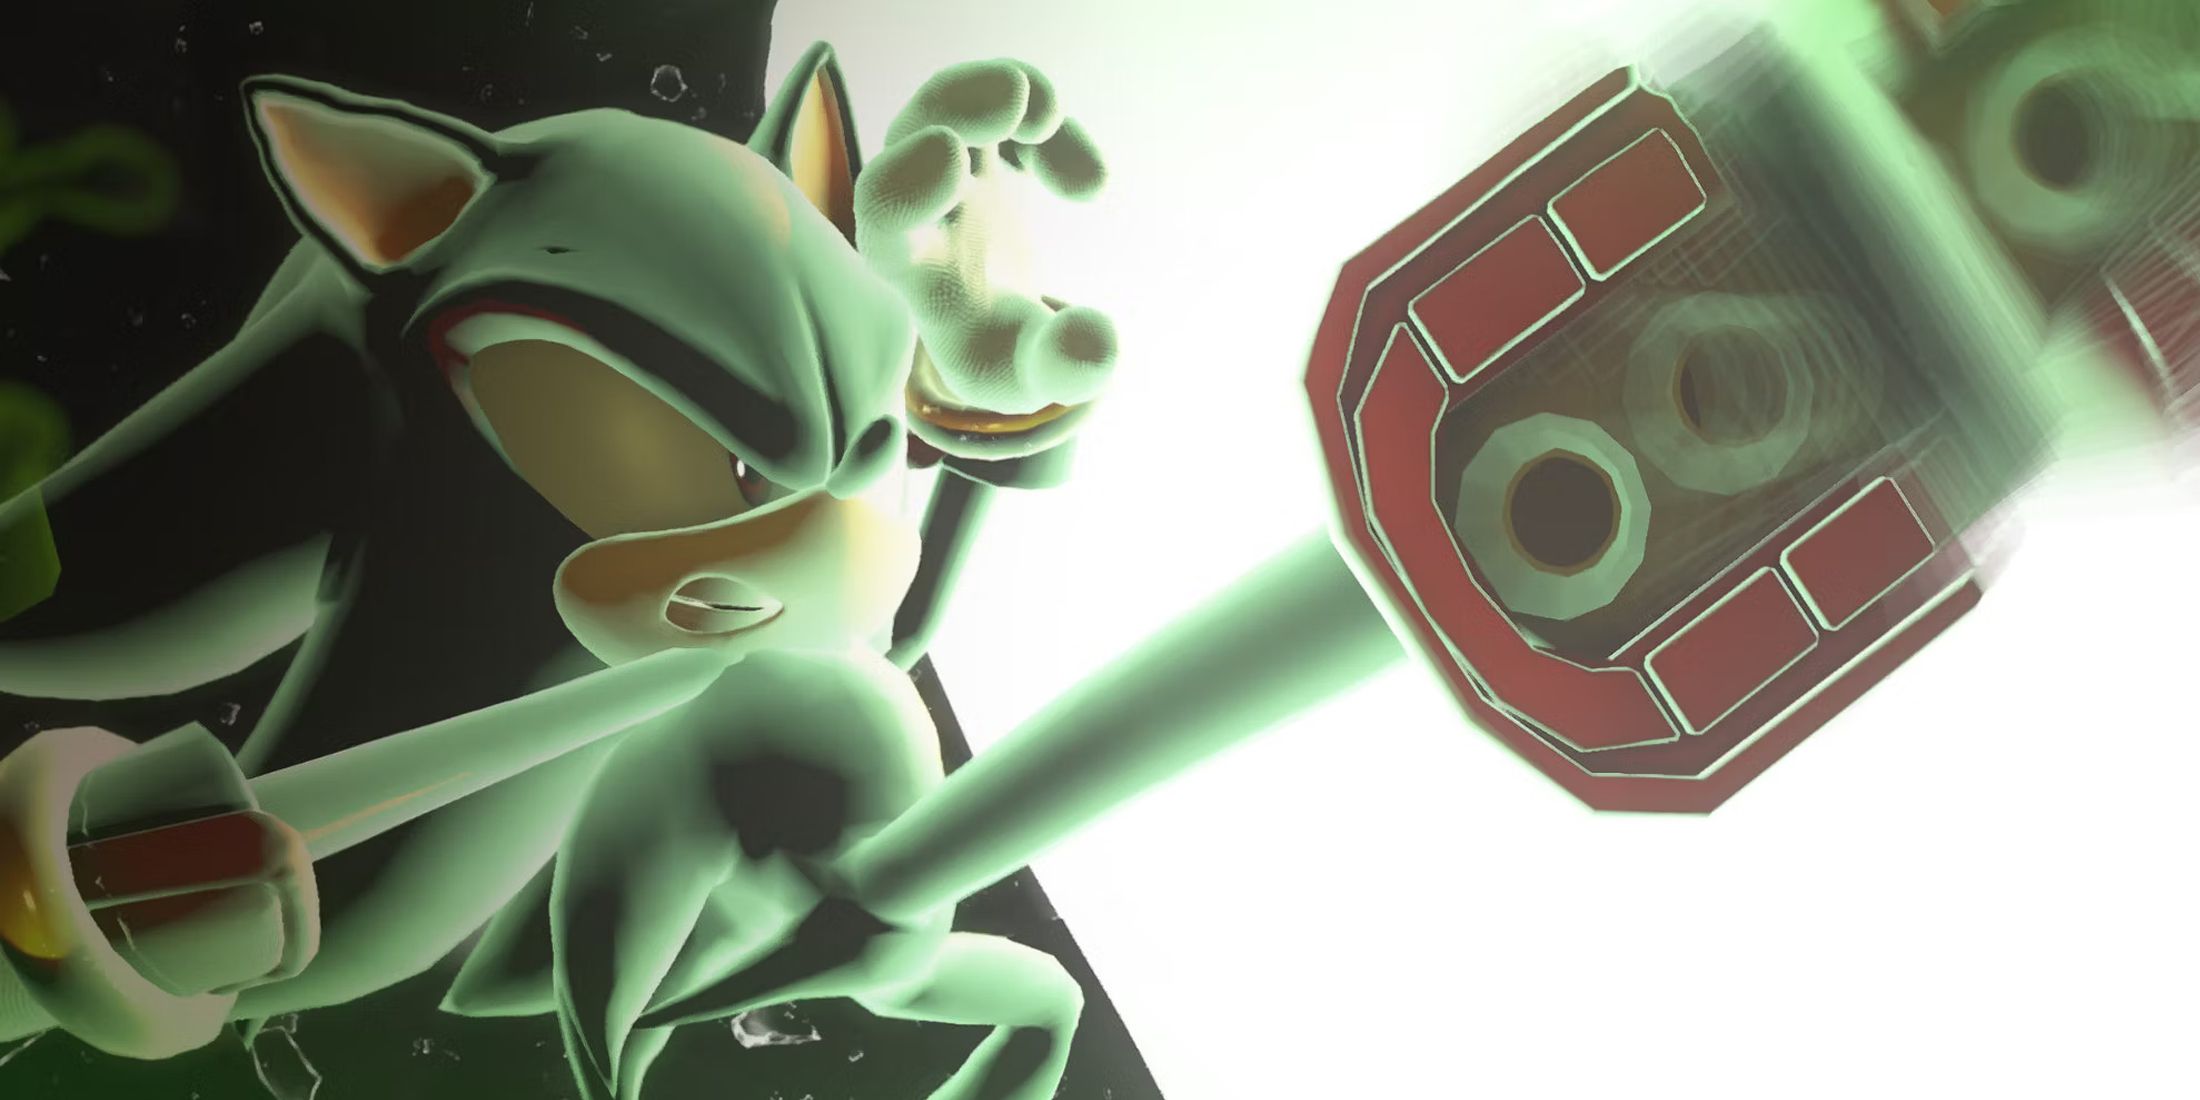 A screenshot of Shadow the Hedghog kicking a green energy in Sonic X Shadow Generations.